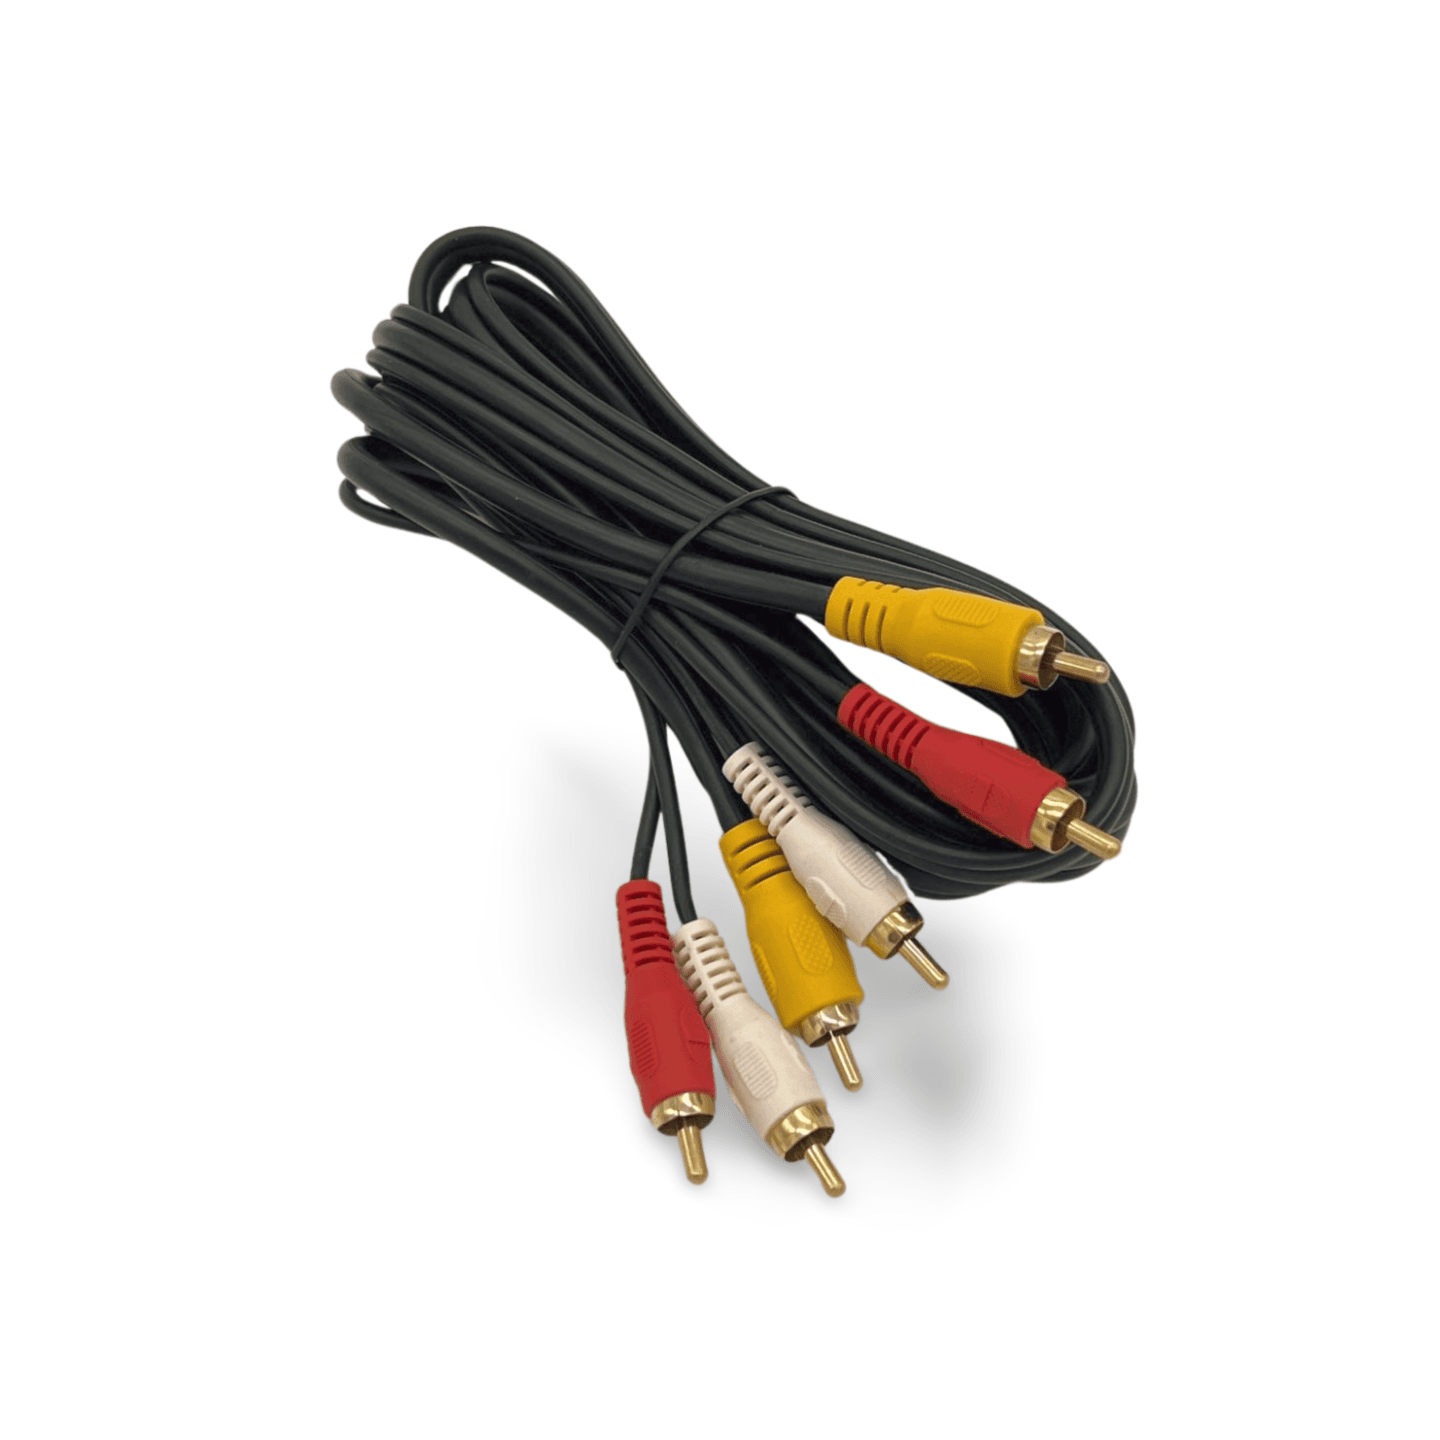 6ft Dual RCA Audio RG59 Video Cable black